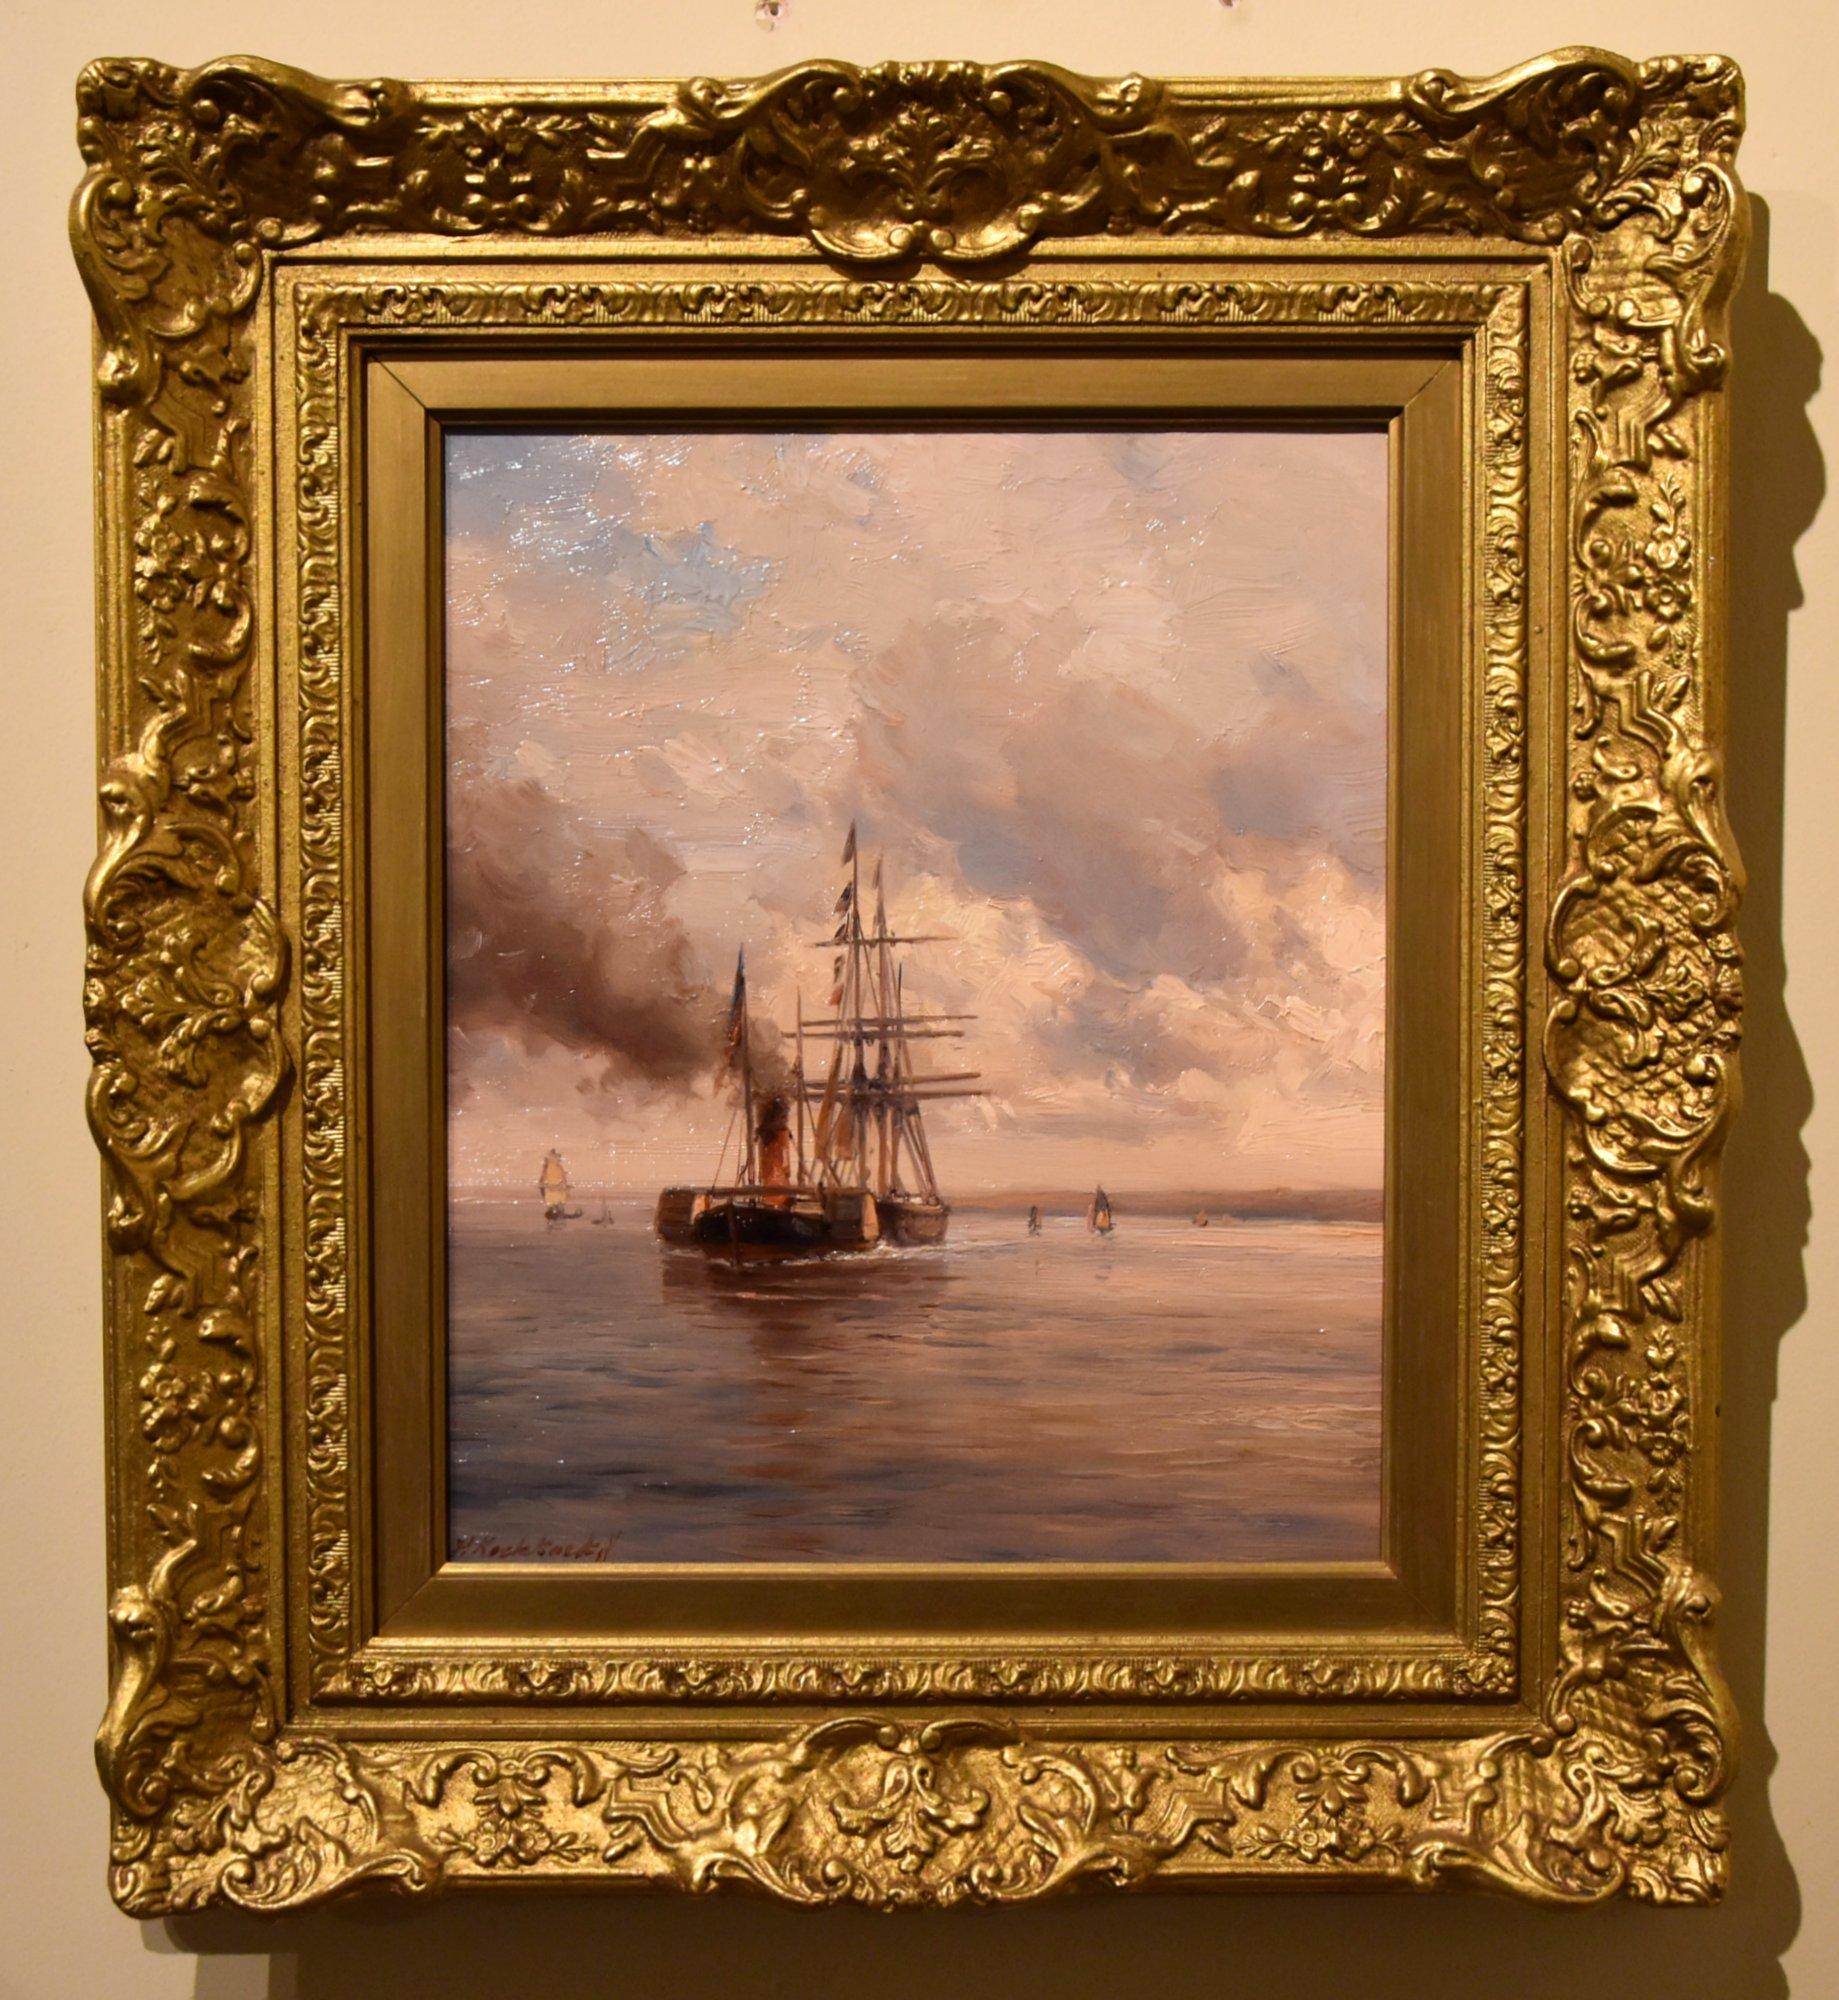 Oil Painting Pair by Hermanus Koekkoek Jnr "Towed In" RBA 1836 - 1909. Maritime and Townscene painter from a Dutch family of Painters. Oil on Canvas. Signed Provenance.

Dimensions unframed 12 x 20 inches
Dimensions framed 18  x 16 inches

All of